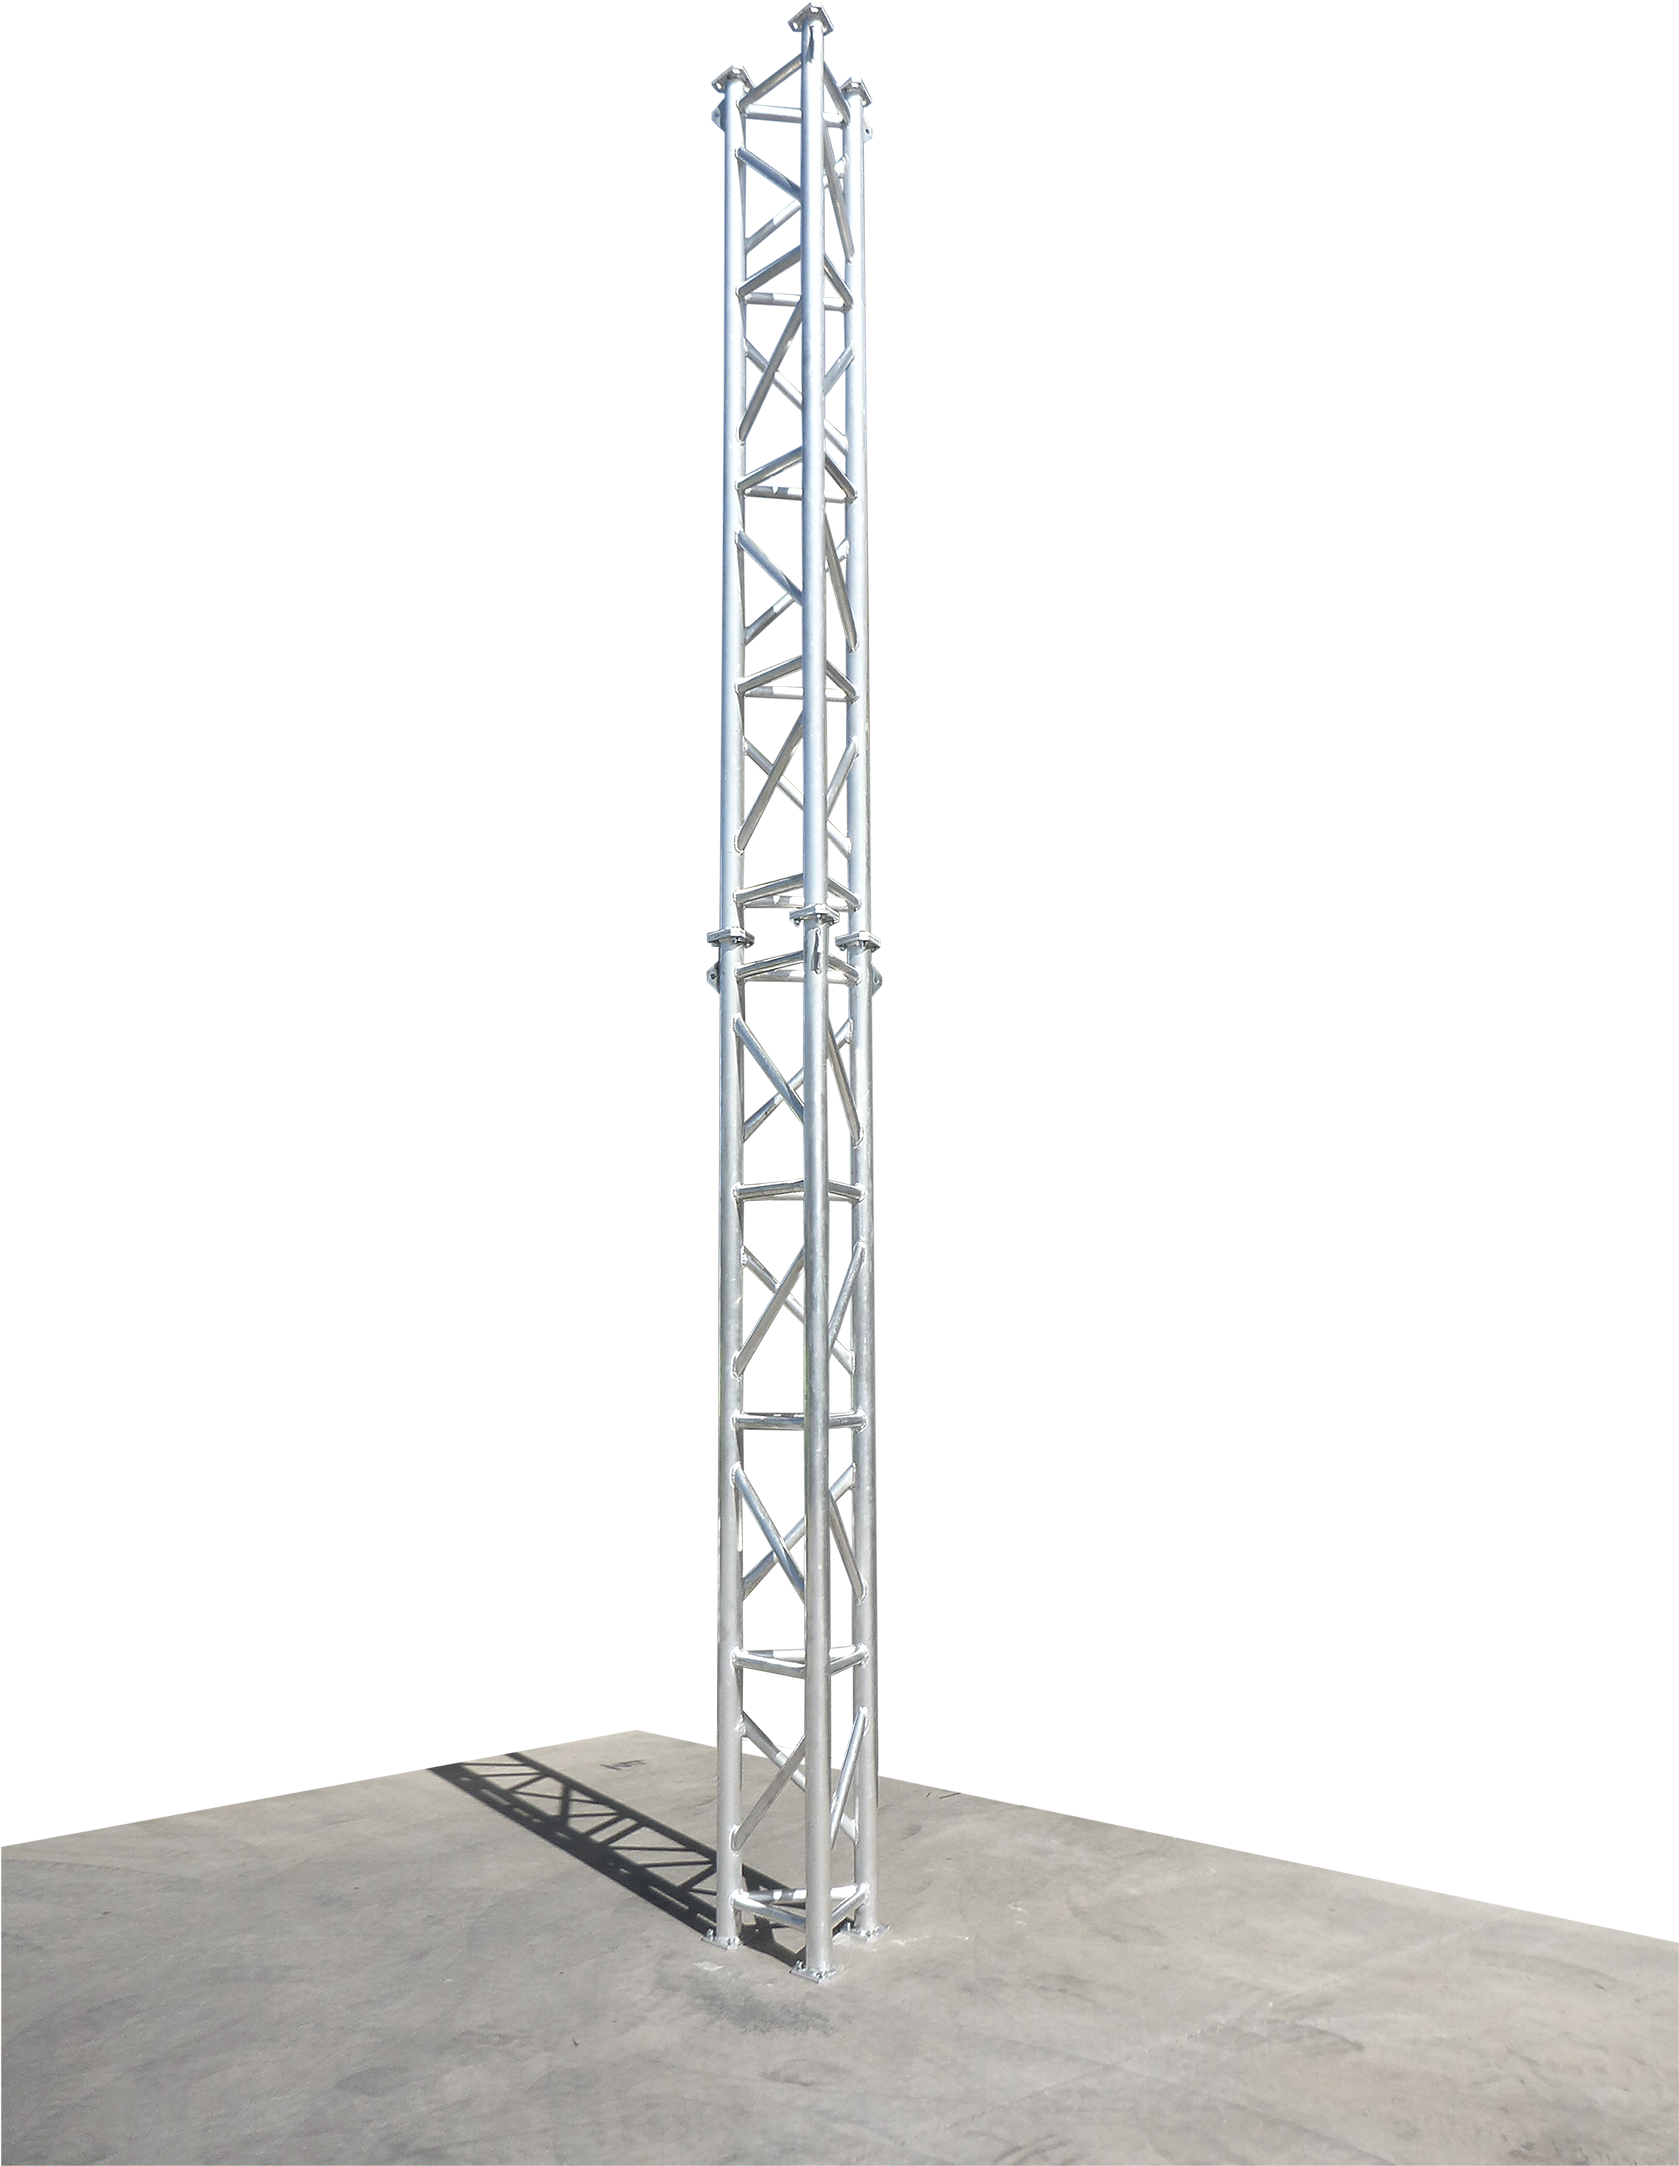 A Metal Tower With A Black Background